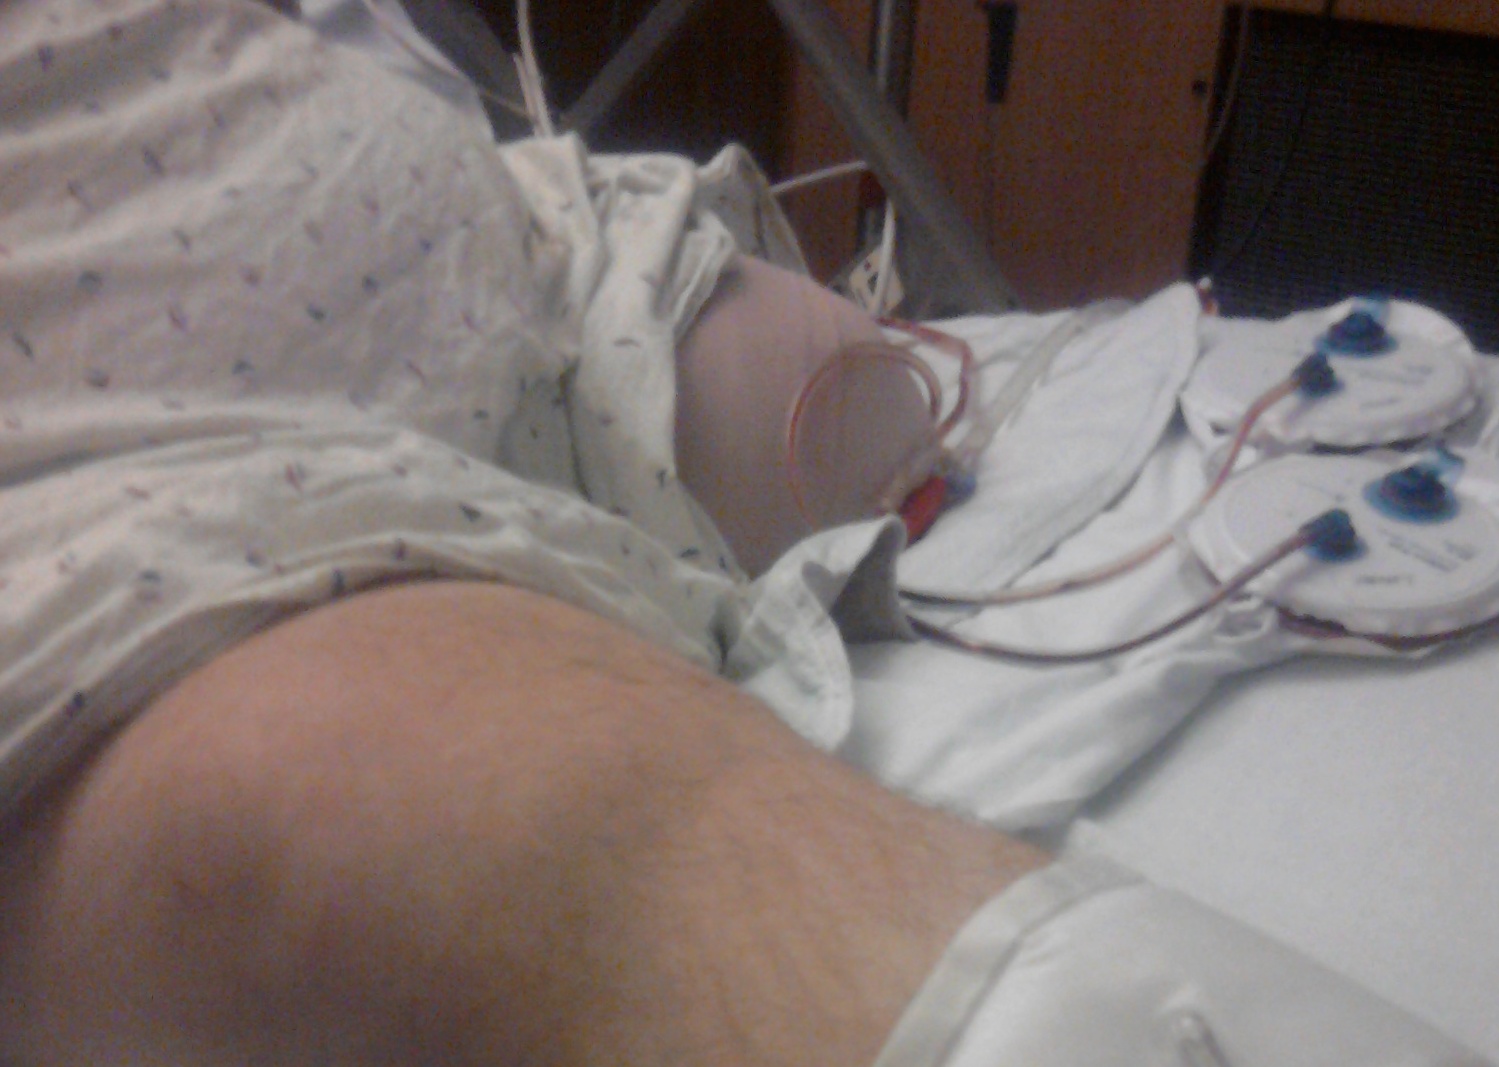 https://upload.wikimedia.org/wikipedia/commons/8/8a/2nd_day_post_op_after_amputation_of_left_leg_due_to_liposarcoma.jpg